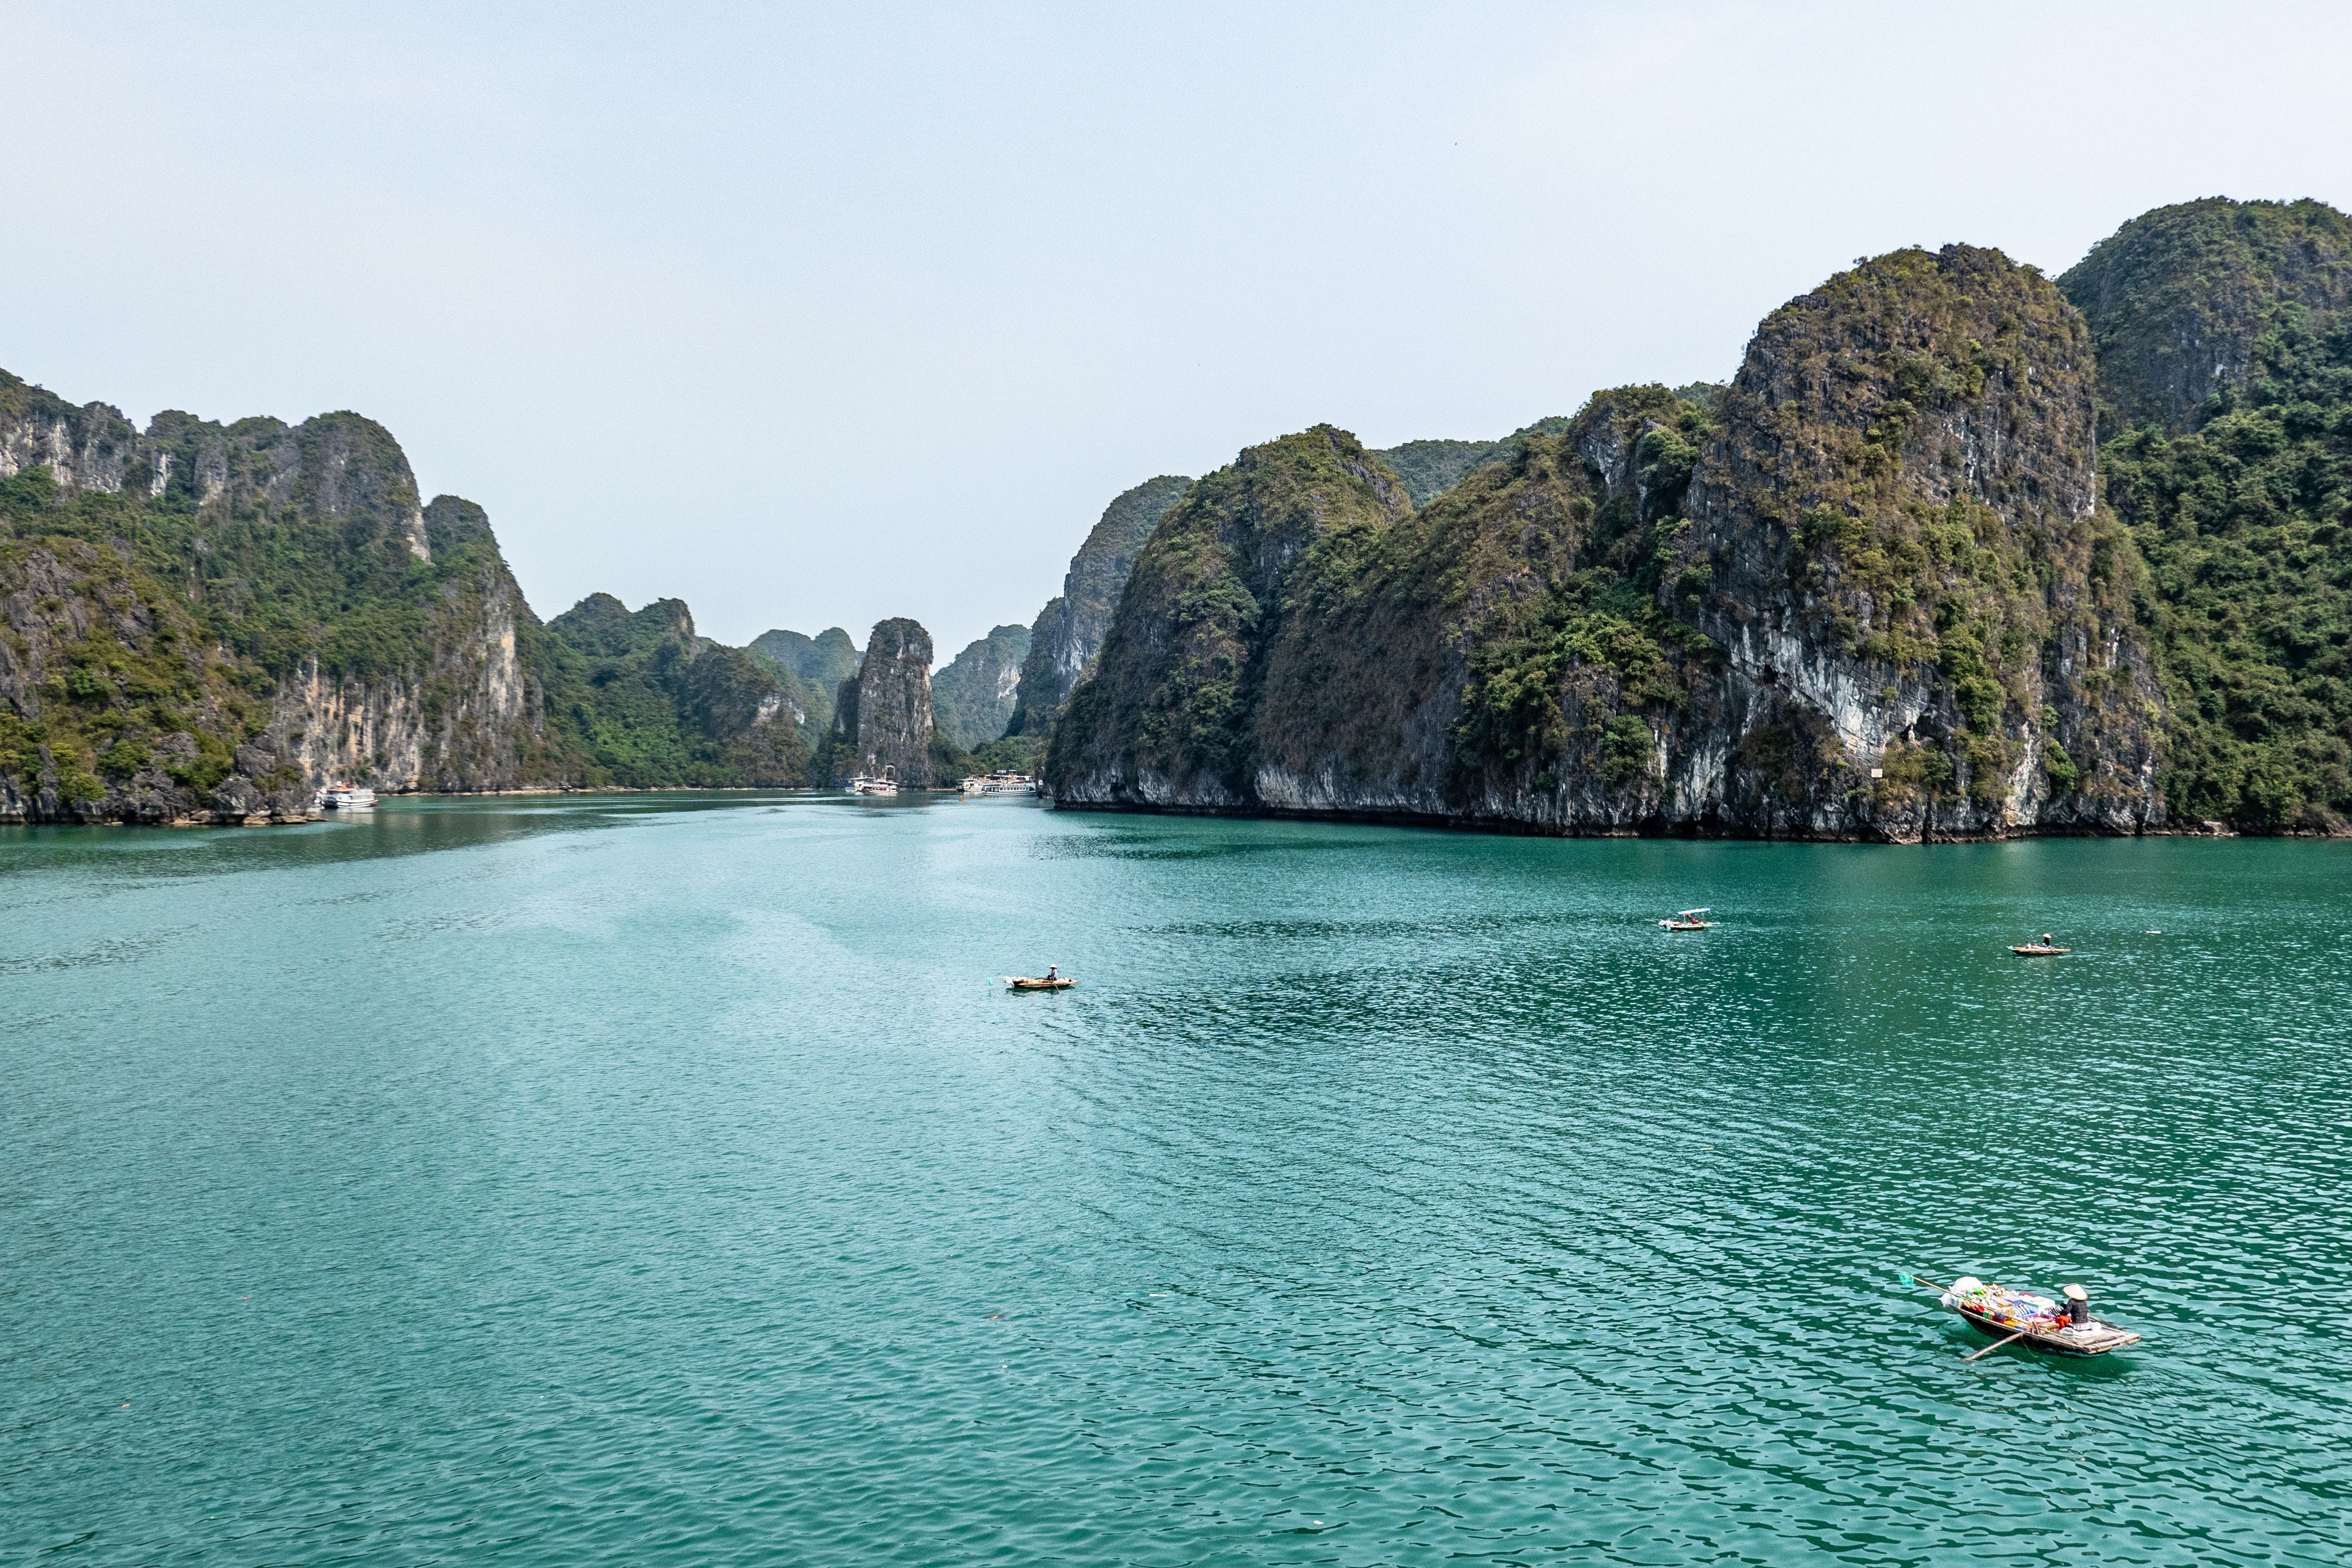 A Boat Floating On The Water In Ha Long Bay